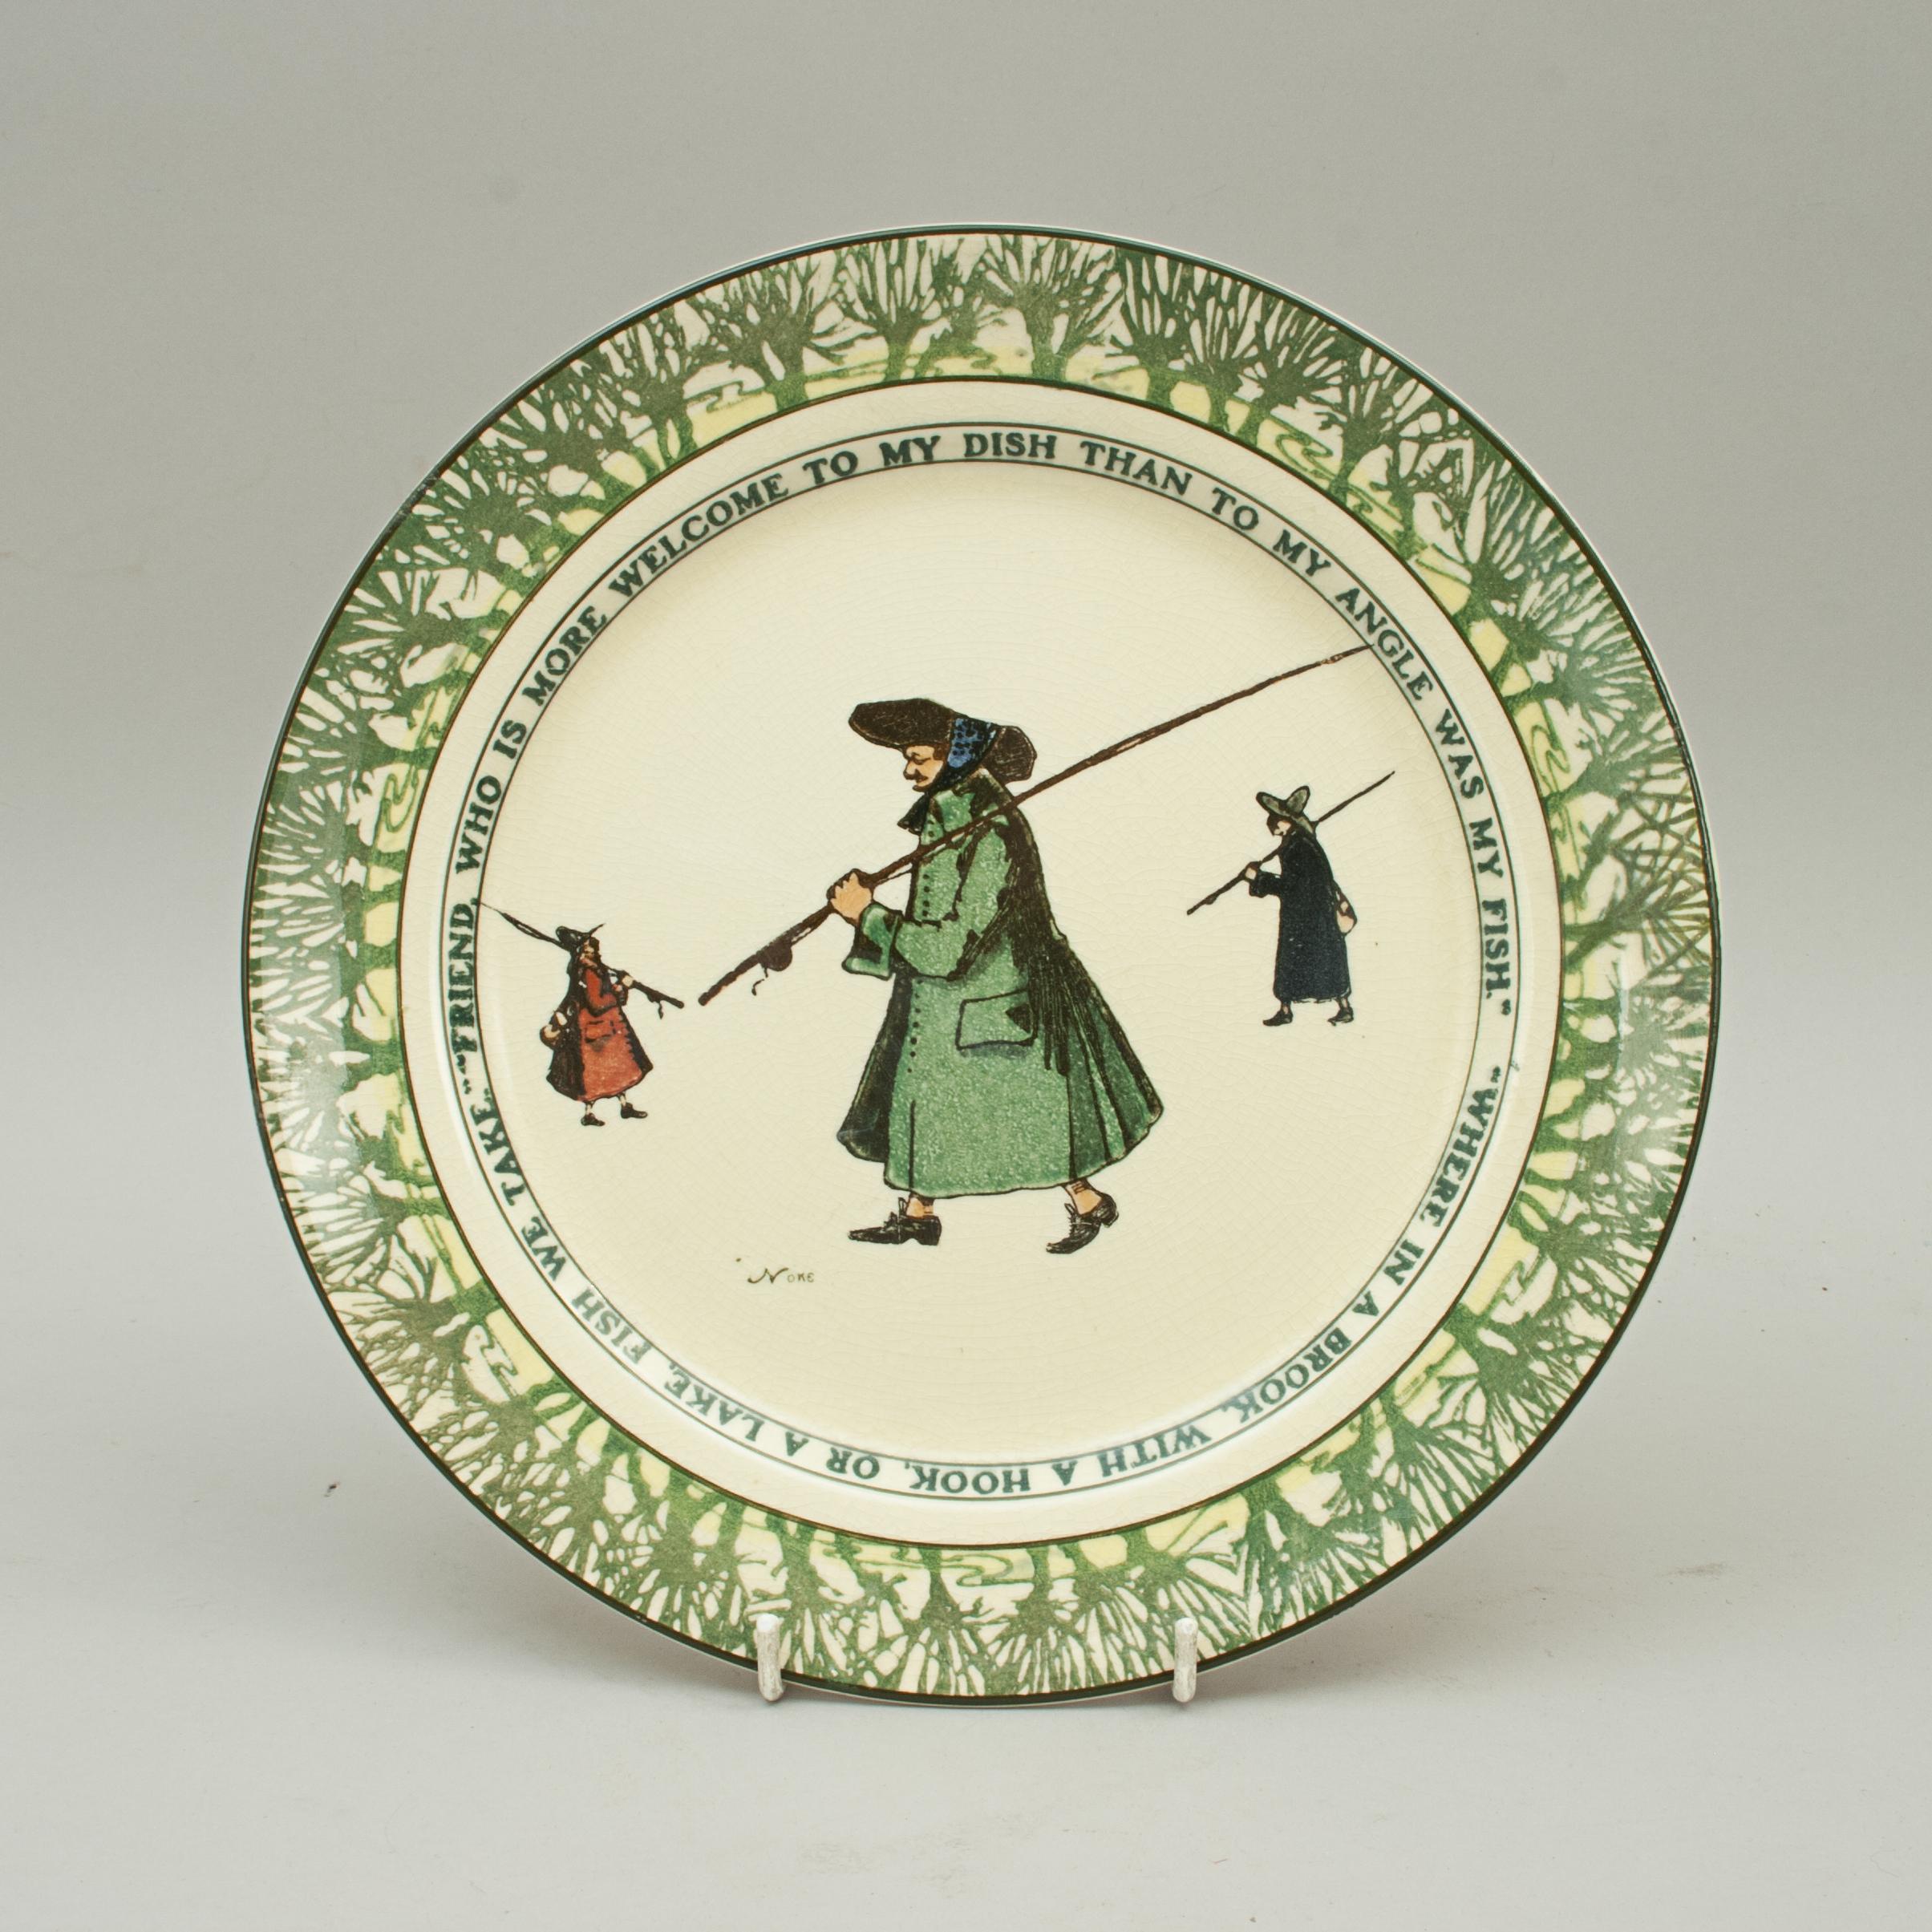 Sporting Art Antique Royal Doulton, Isaac Walton Fishing Plate For Sale